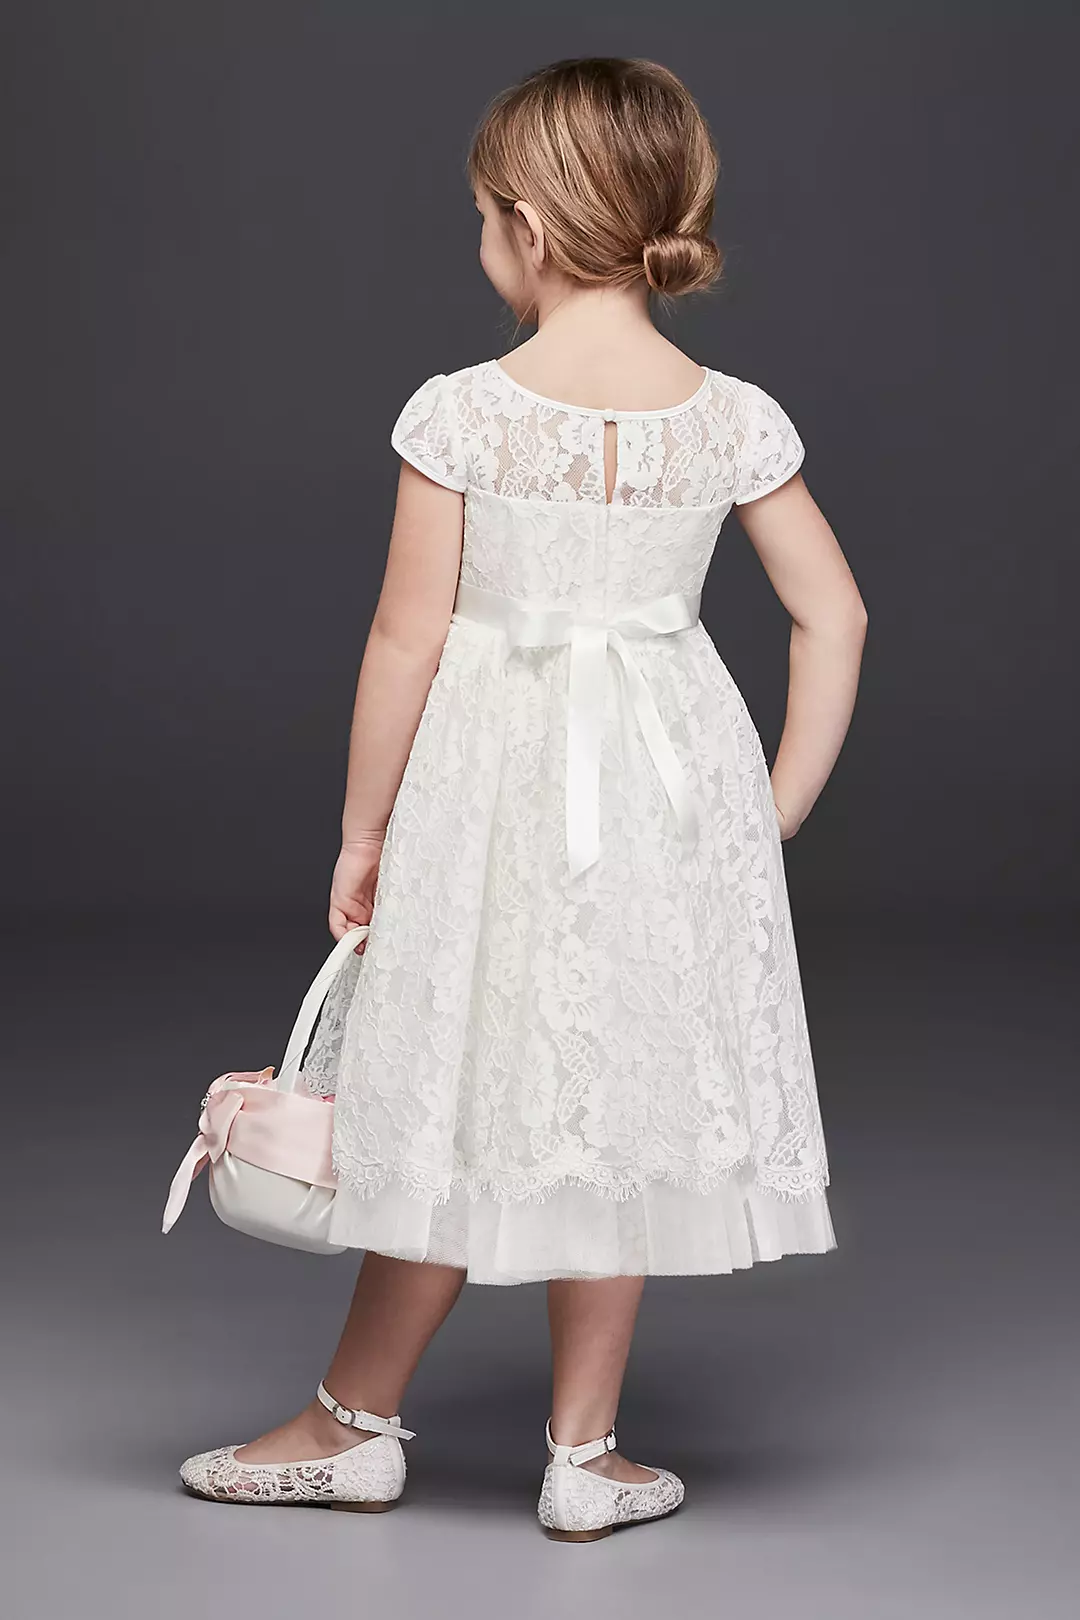 Lace Flower Girl Ball Gown with Illusion Sleeves Image 2